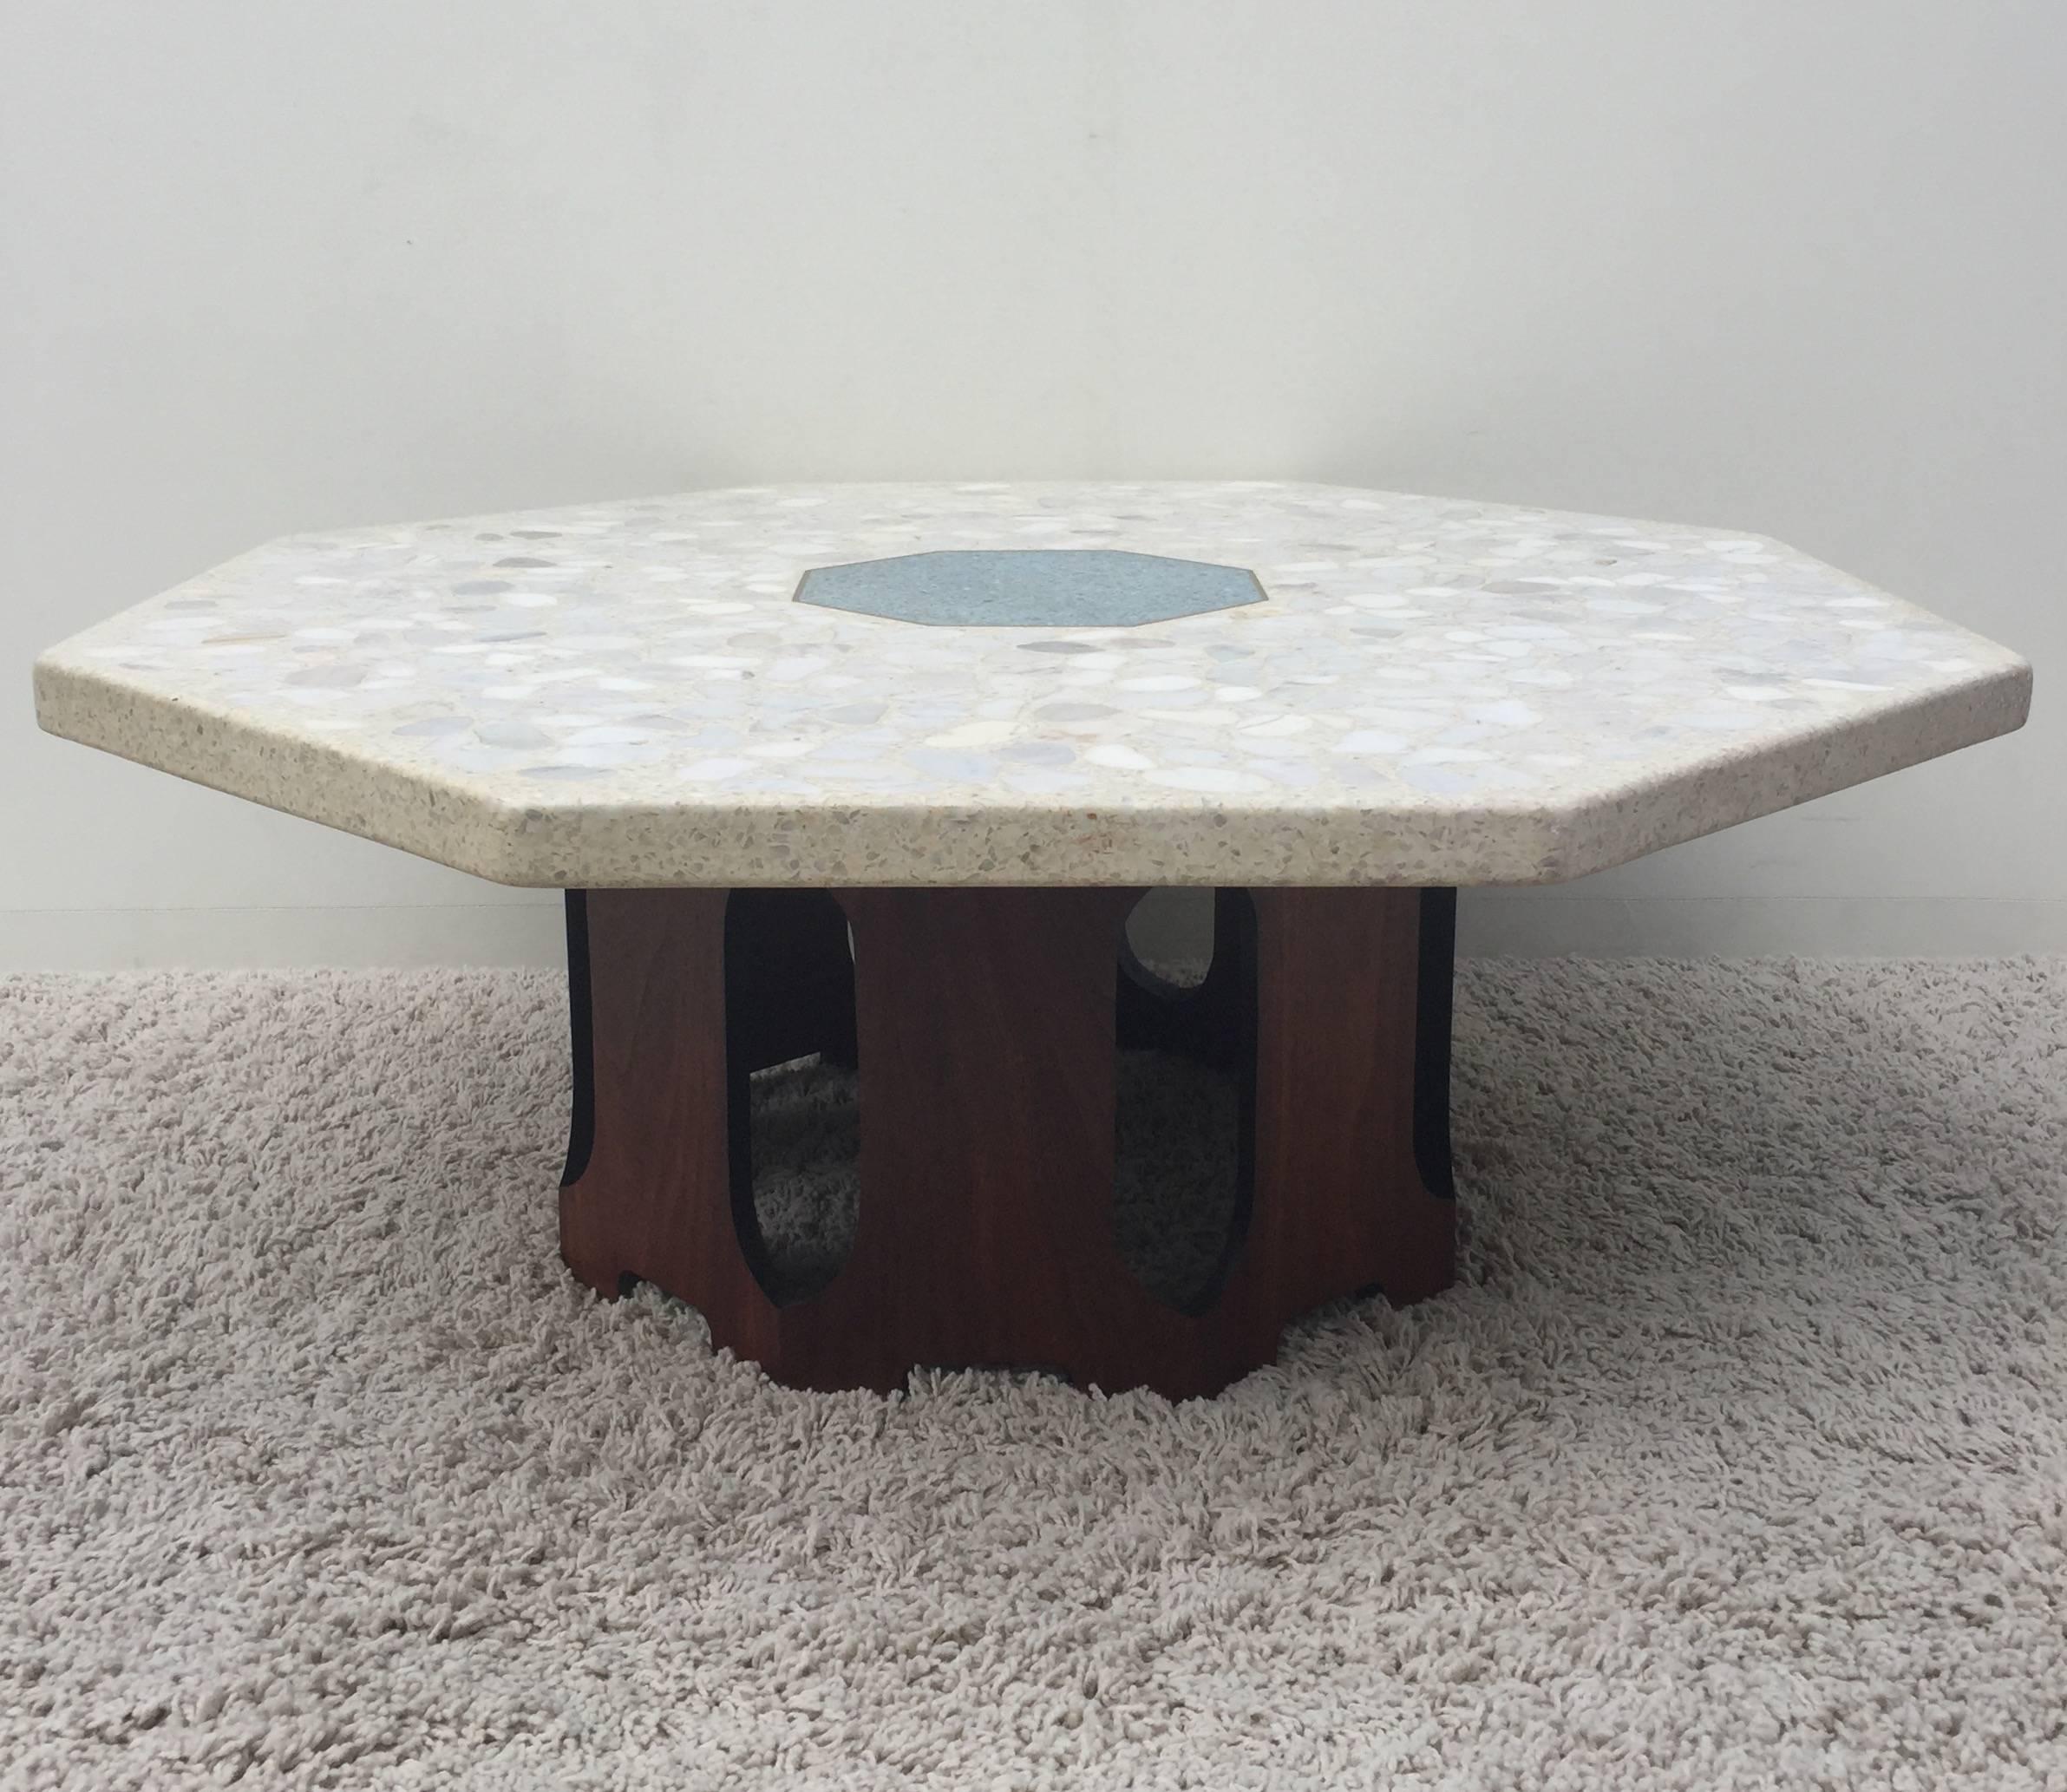 Inlay Harvey Probber Terrazzo Inlaid Turquoise Centre Coffee Table or Cocktail Table